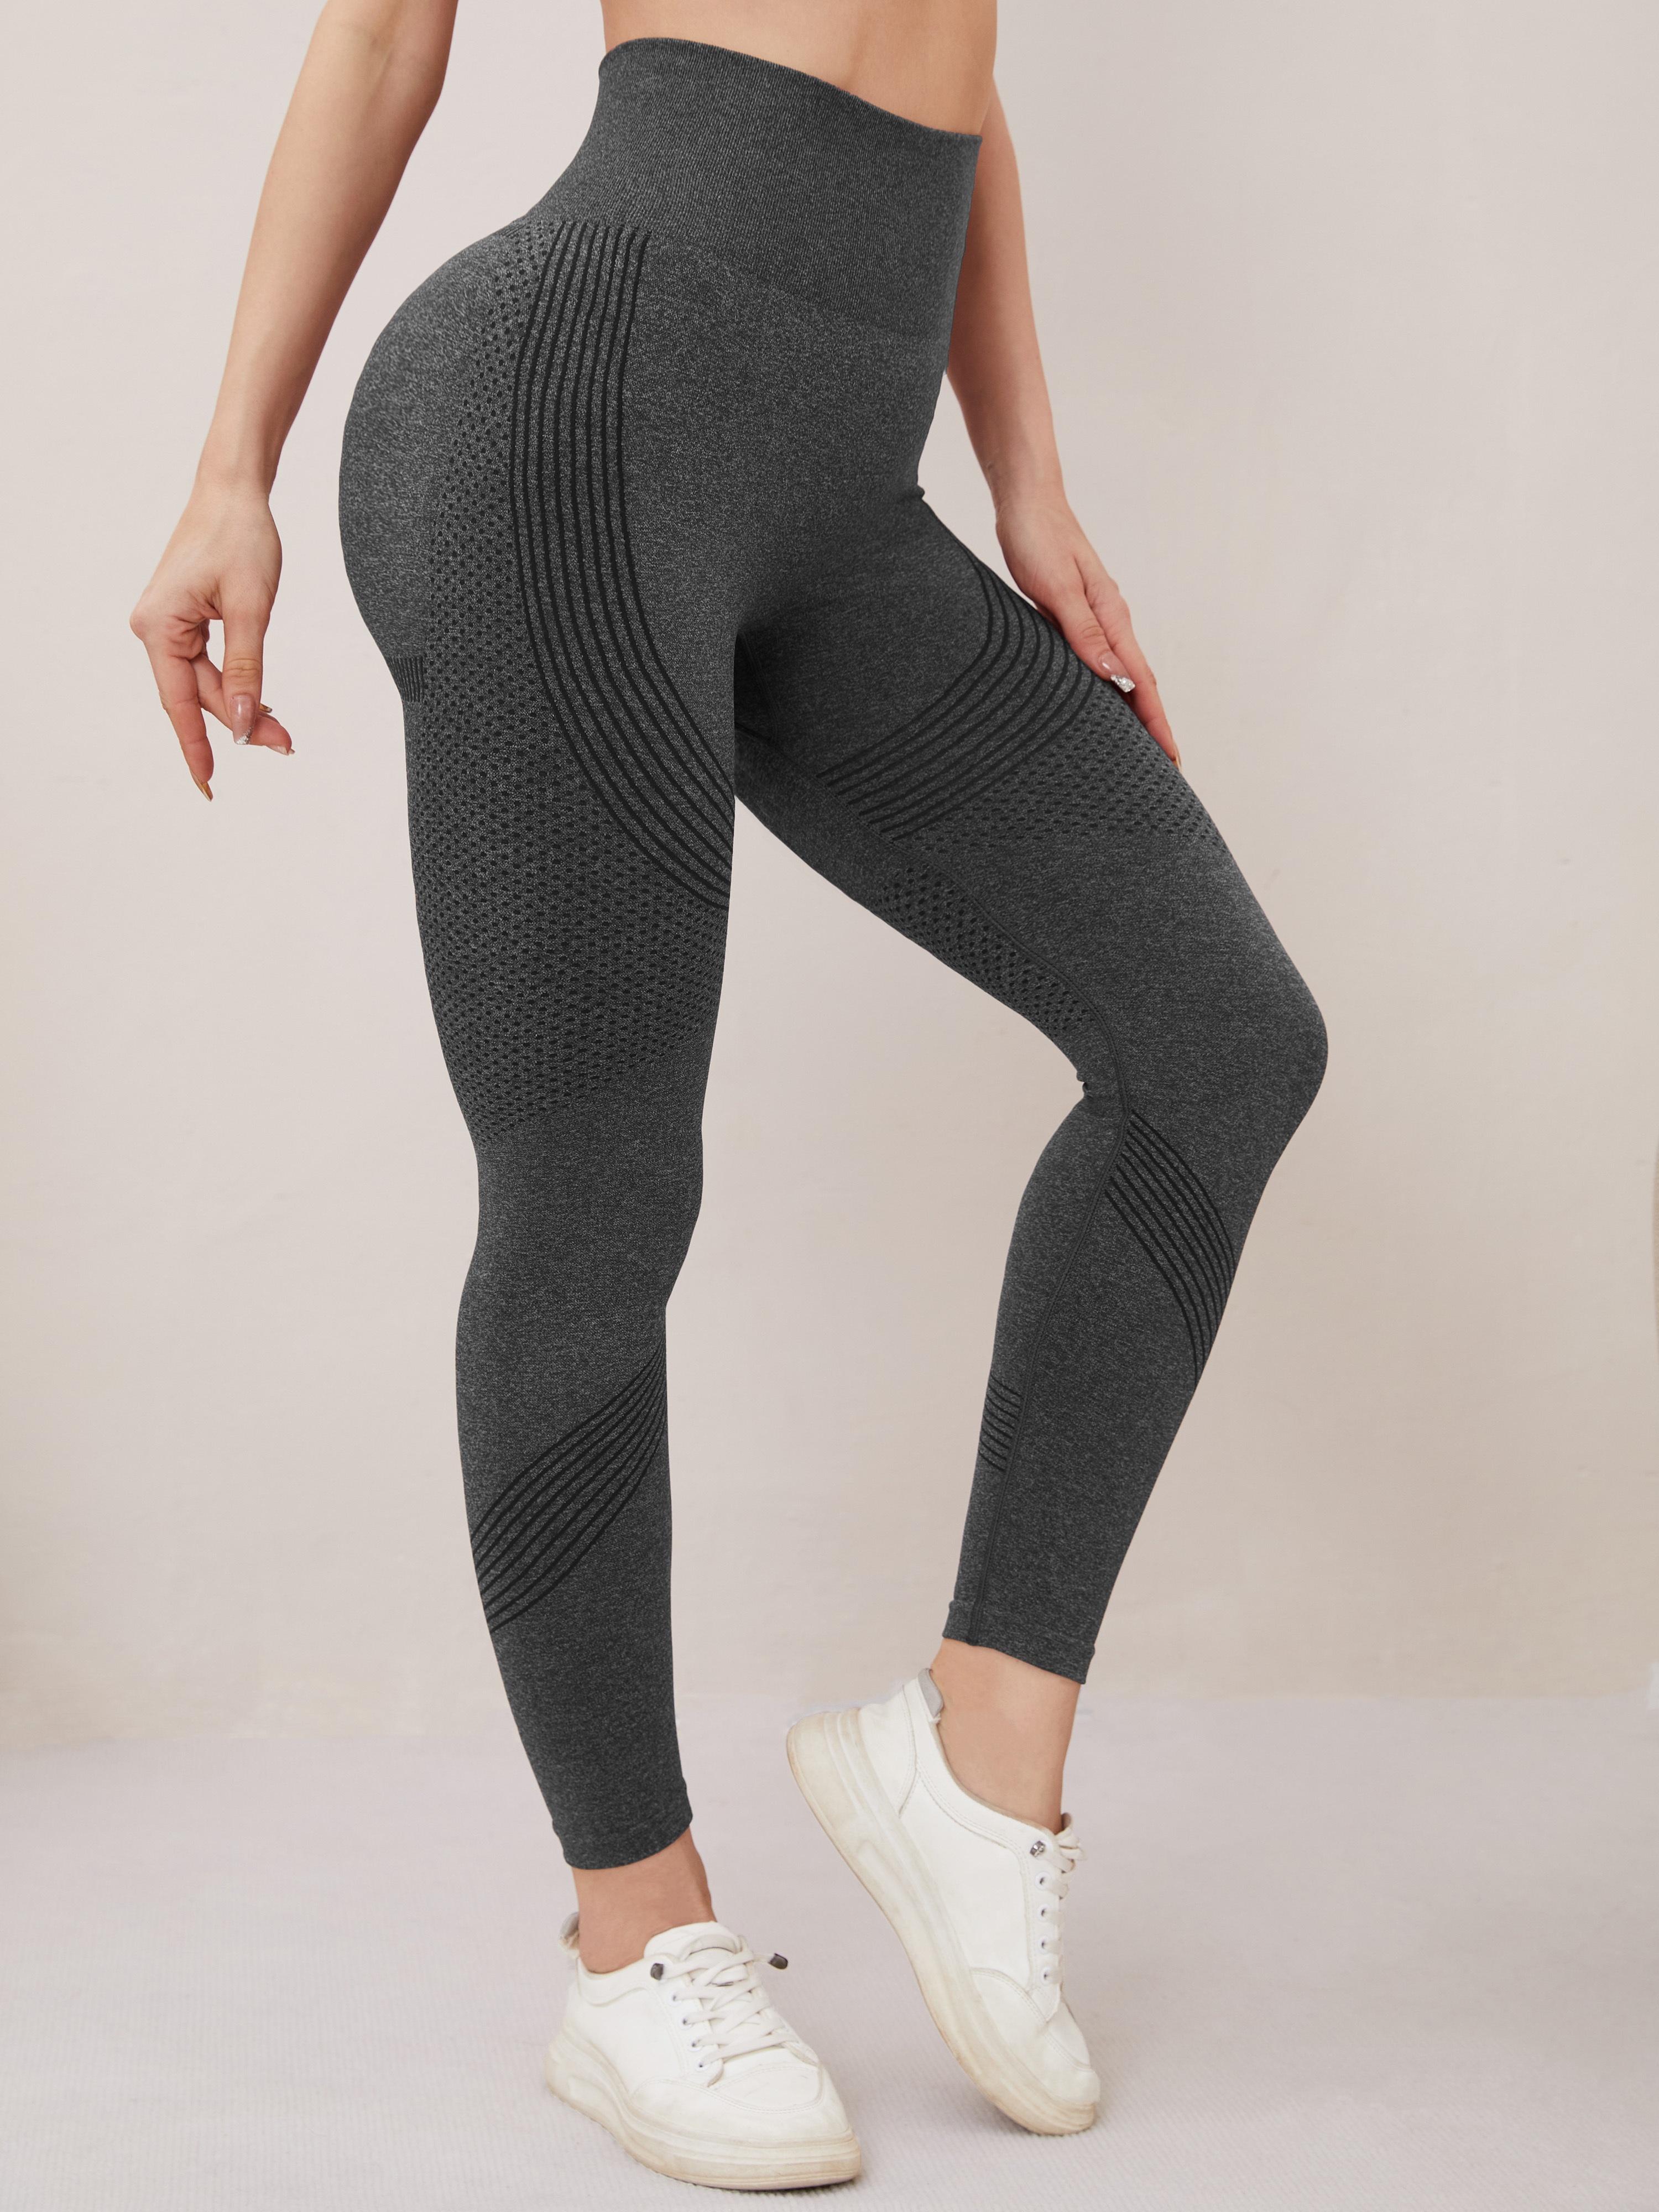 Womens Hip Lifting Yoga Gym Leggings With Pockets For Fitness, Running, And Gym  Workouts Push Up, Sporty, Affordable H1221 From Mengyang10, $7.11